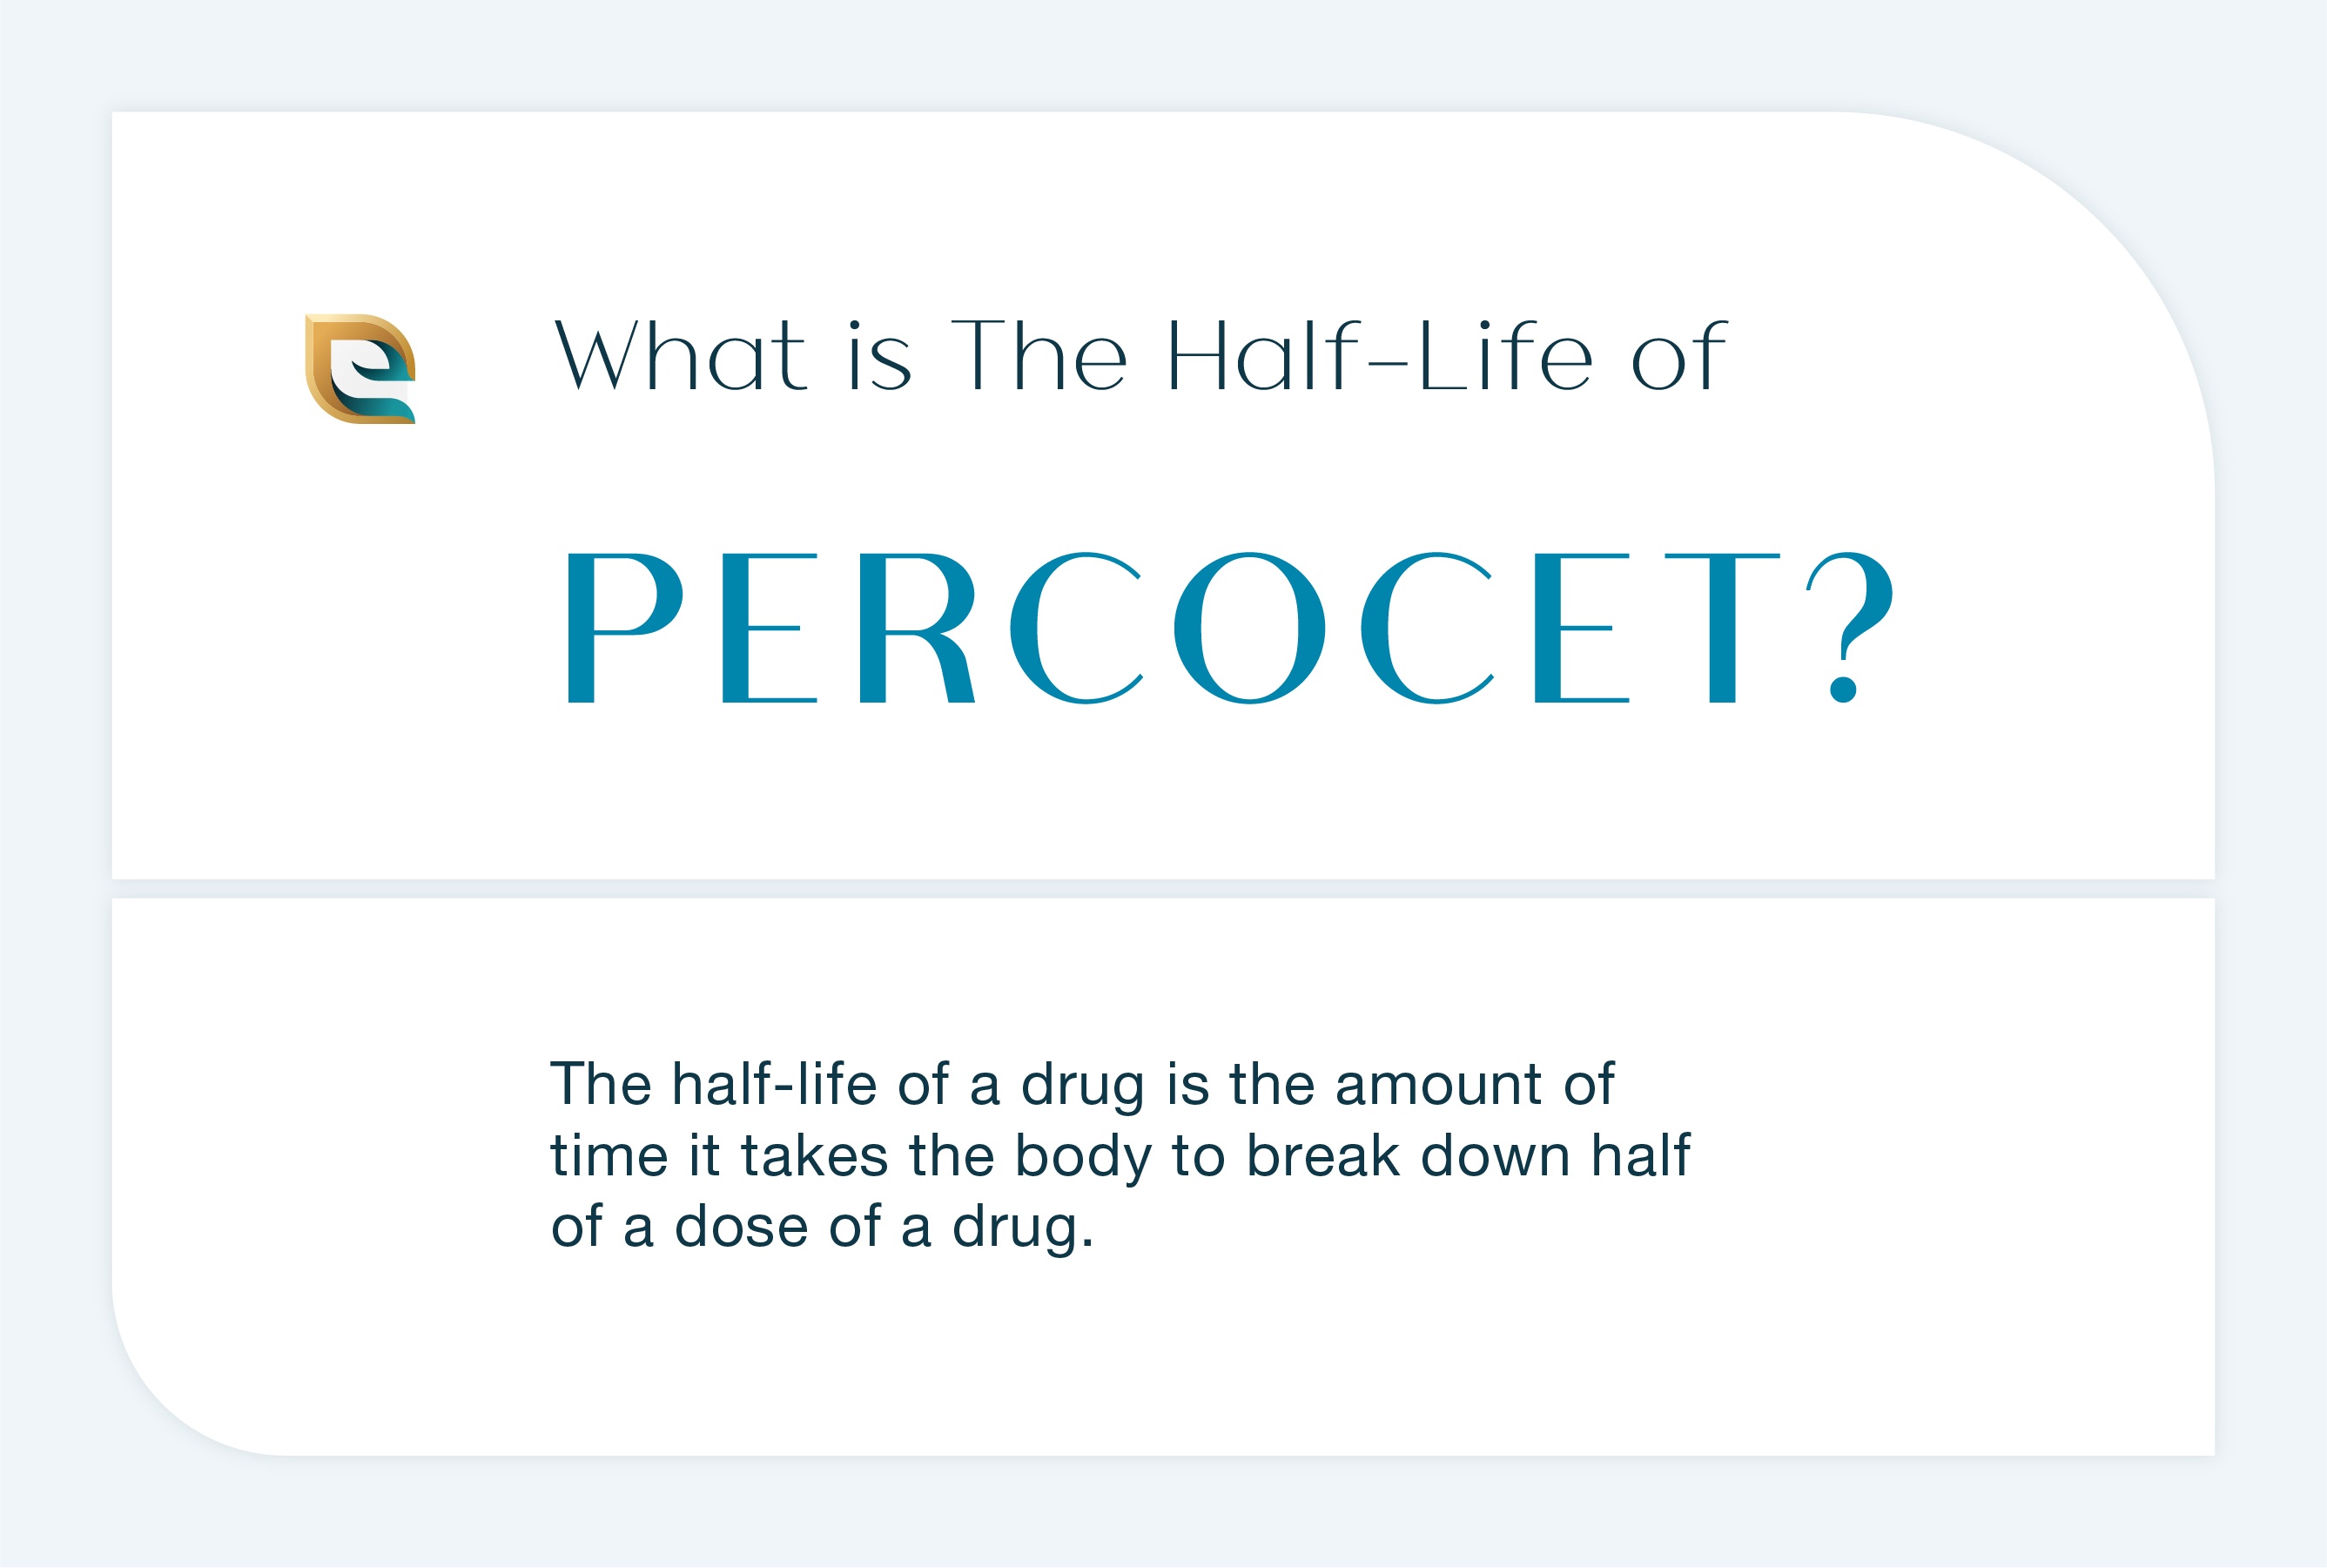 What is the half life of Percocet? This image describes the half life of Percocet